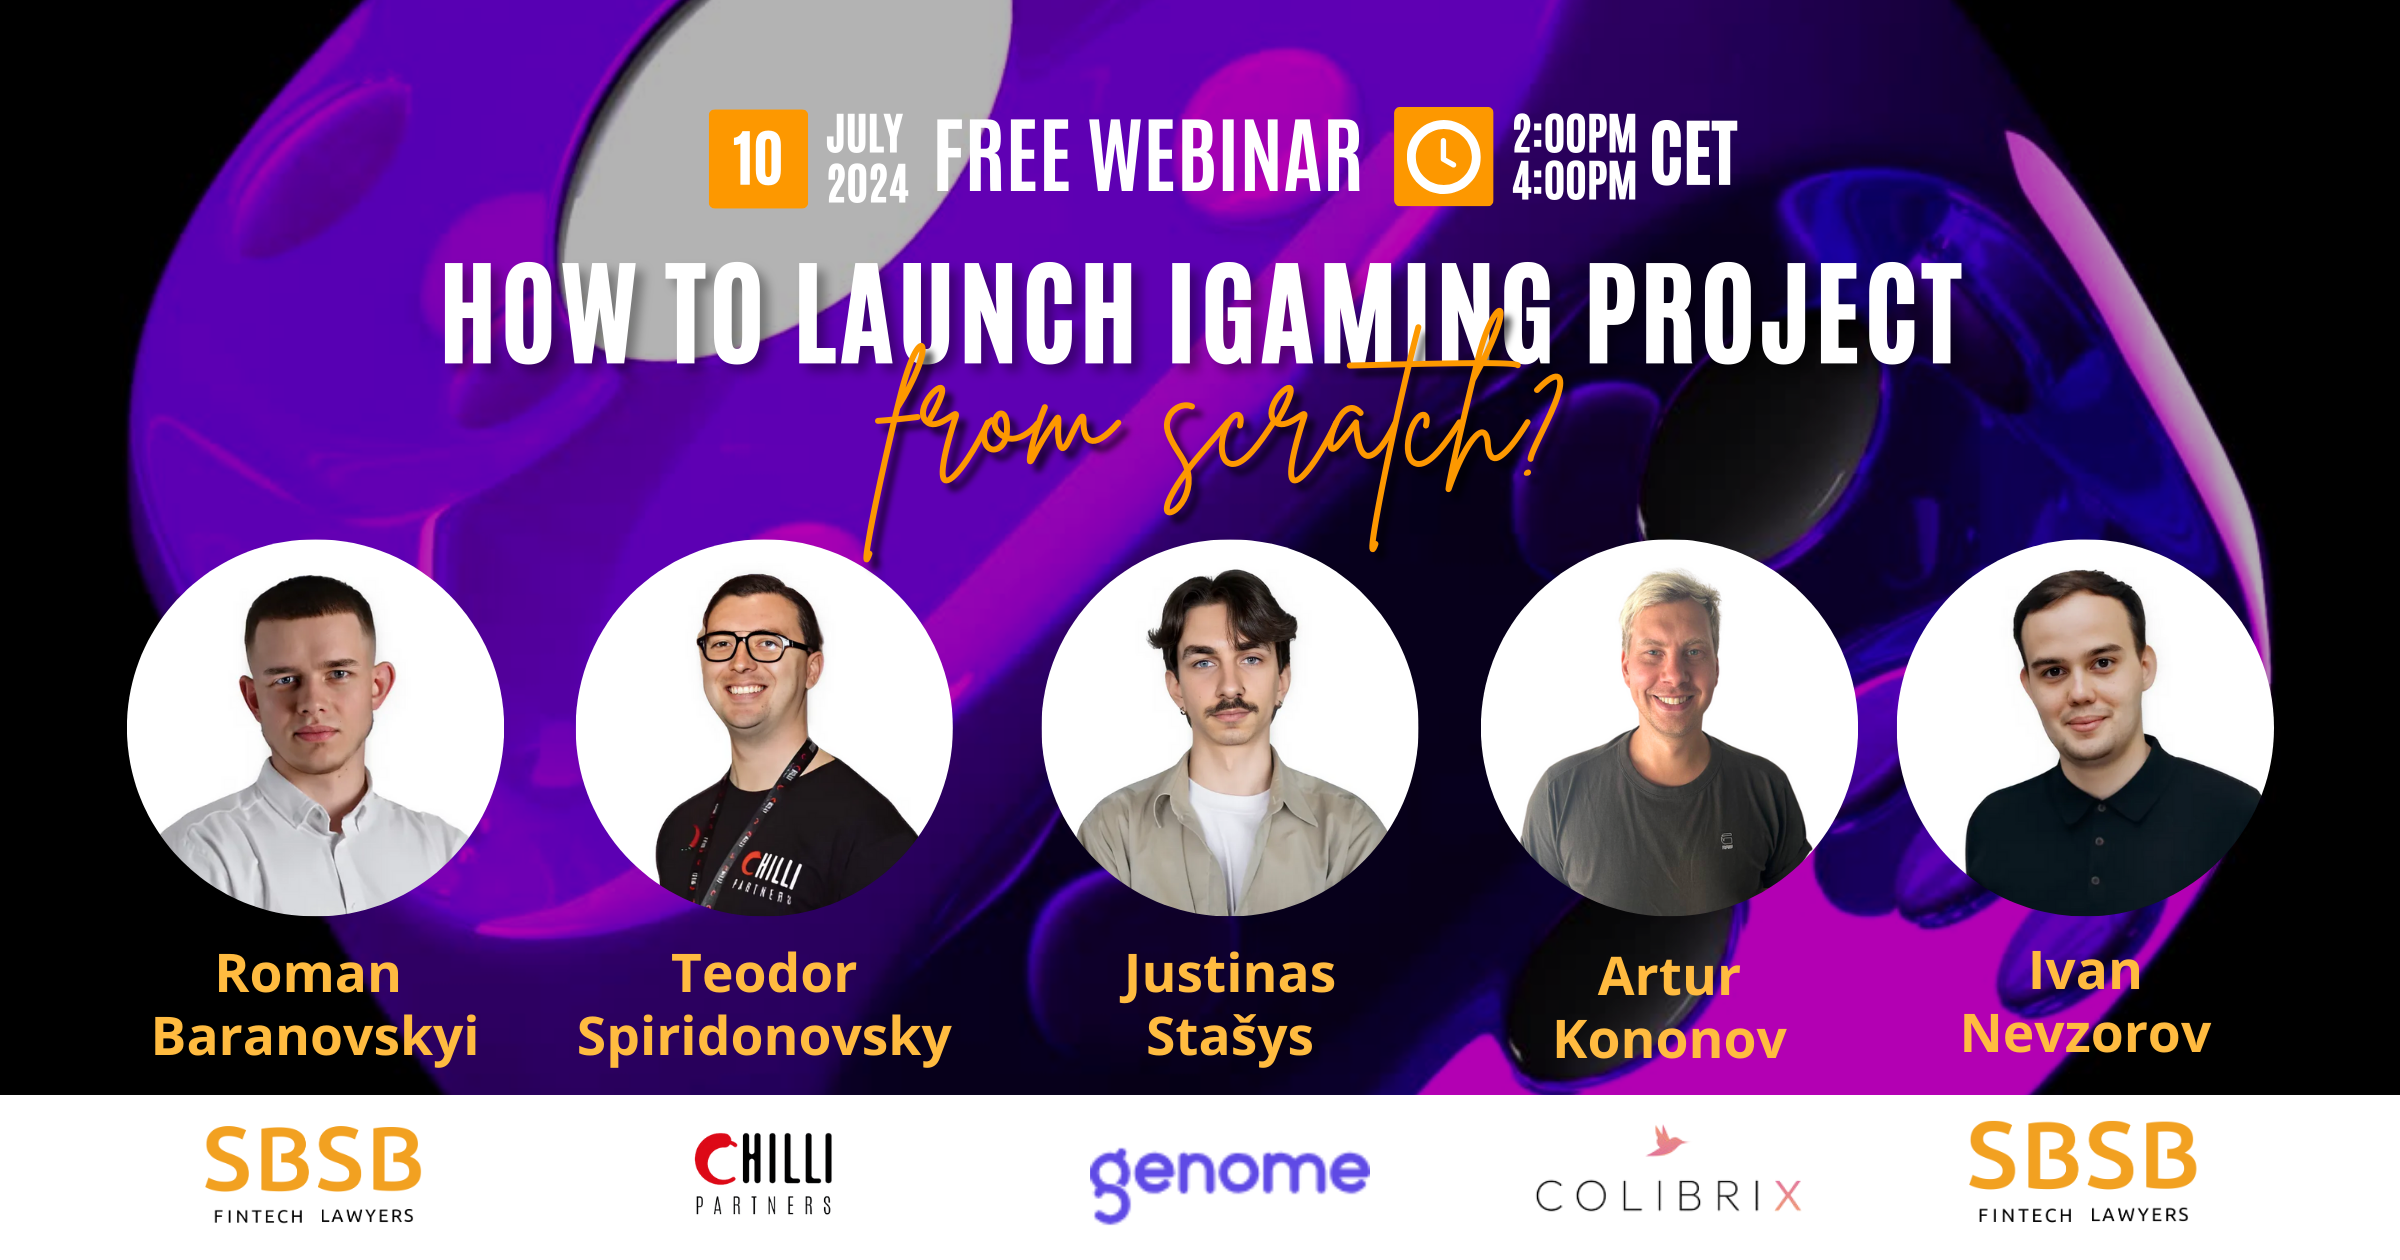 Free Webinar: “How to launch iGaming project from scratch?”